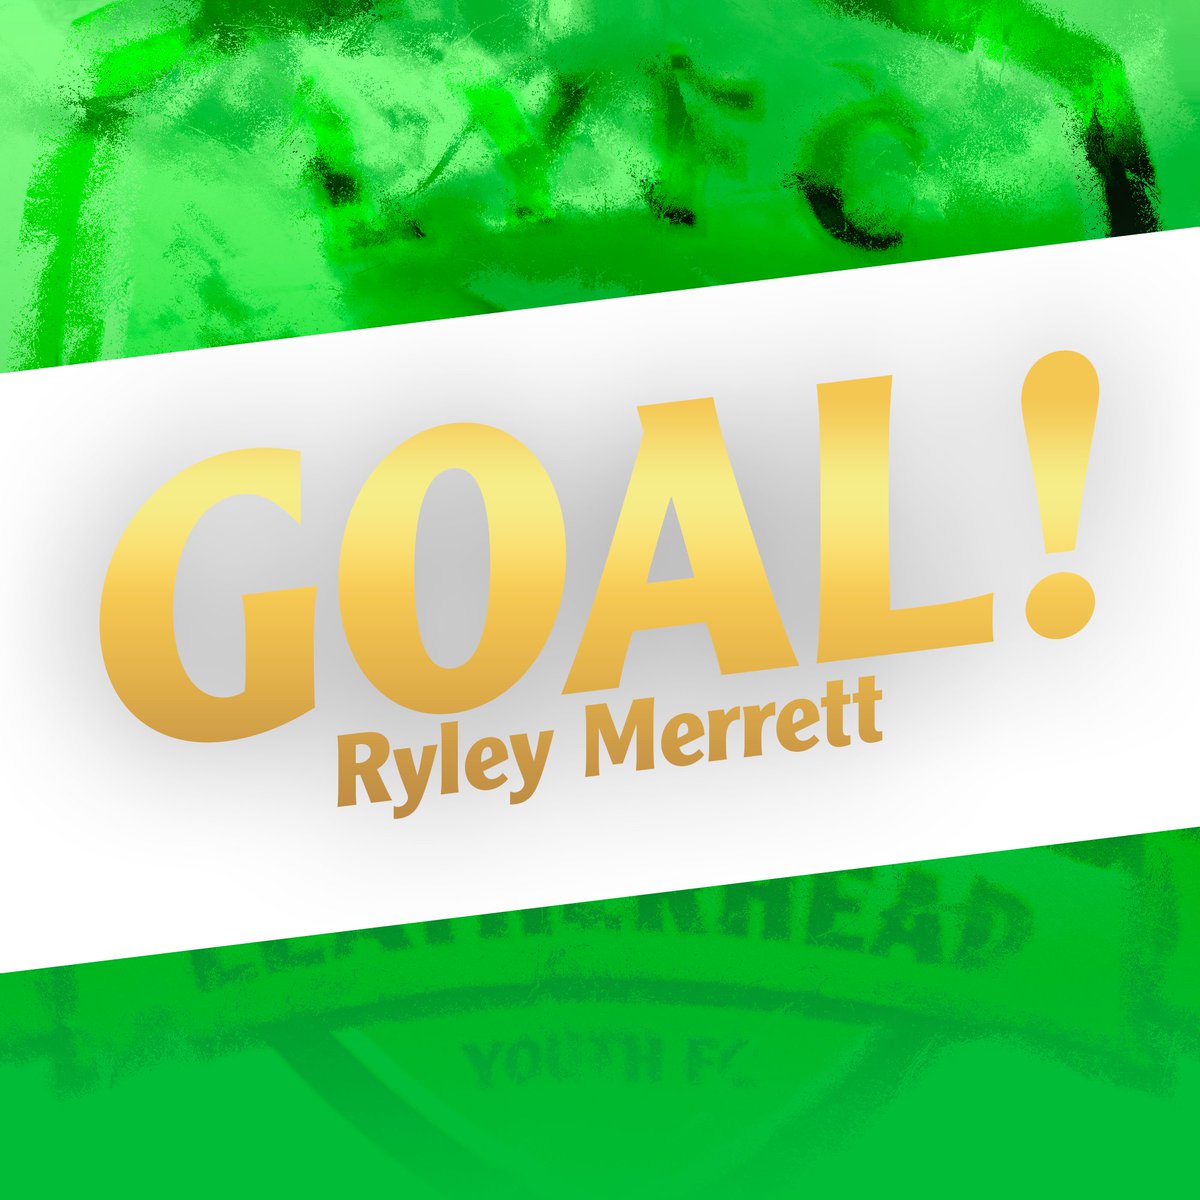 Ryley hits the back of the net to make it 7 to the Swans!